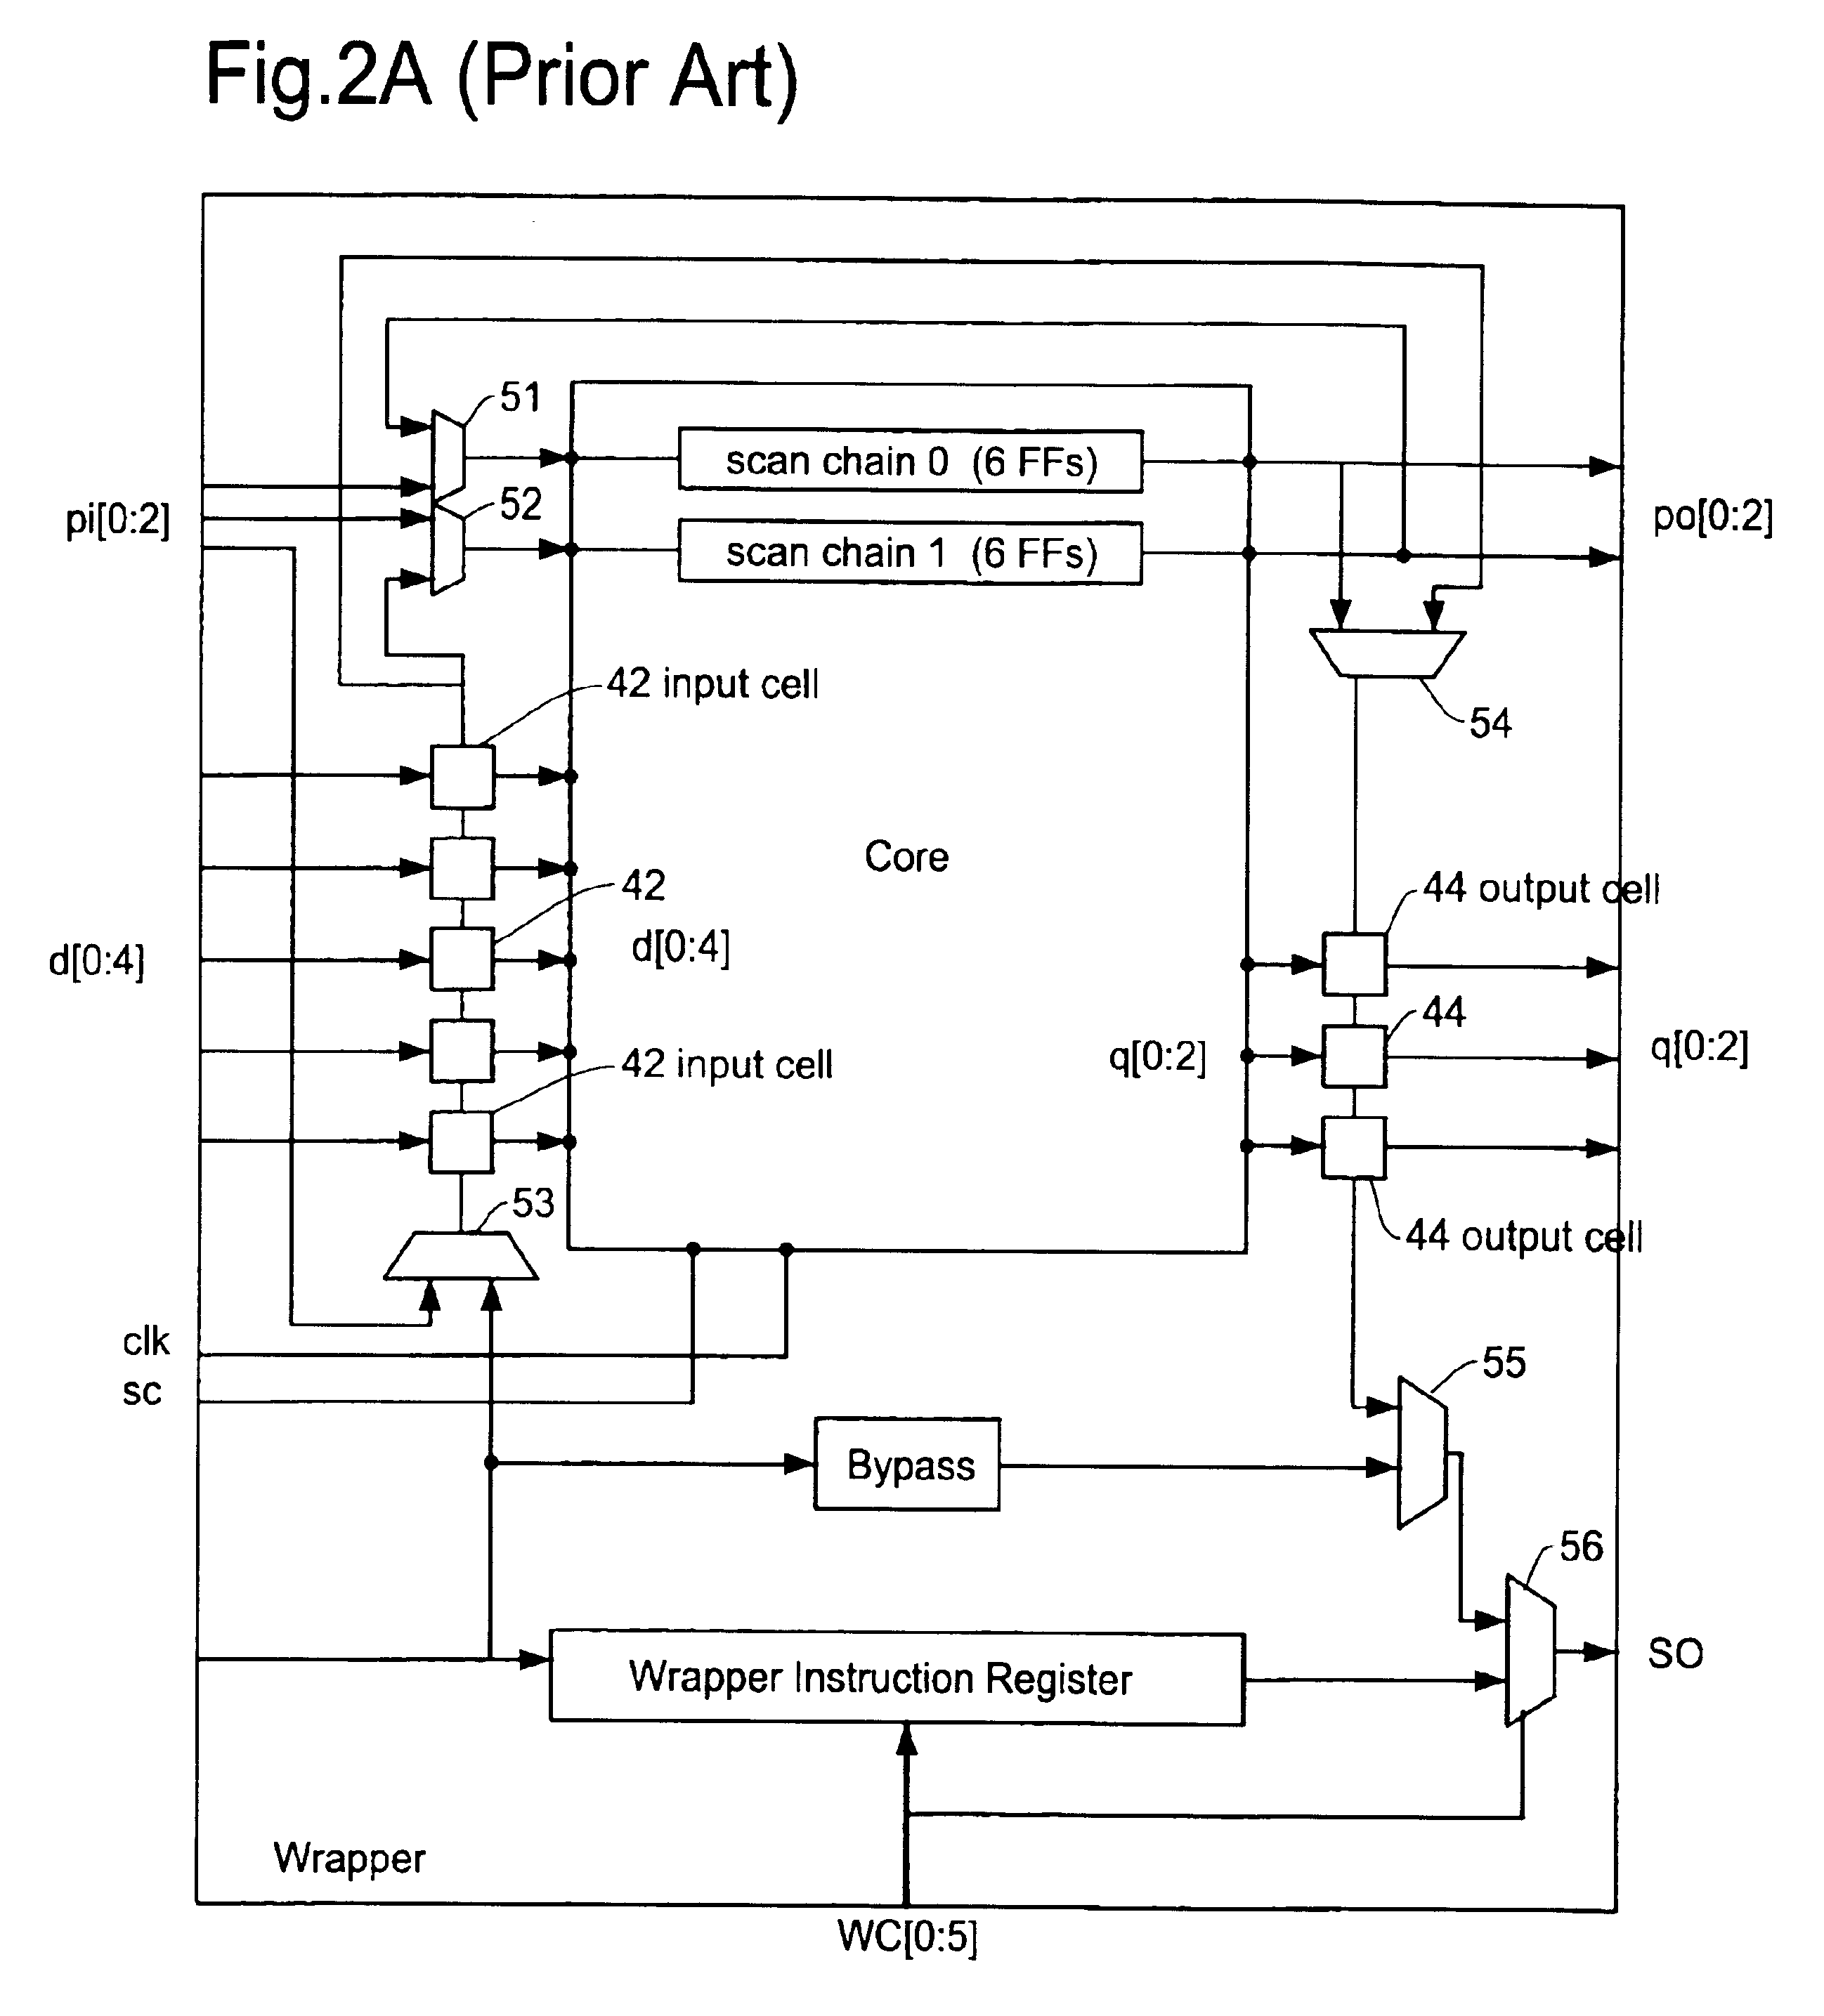 Method of evaluating core based system-on-a-chip